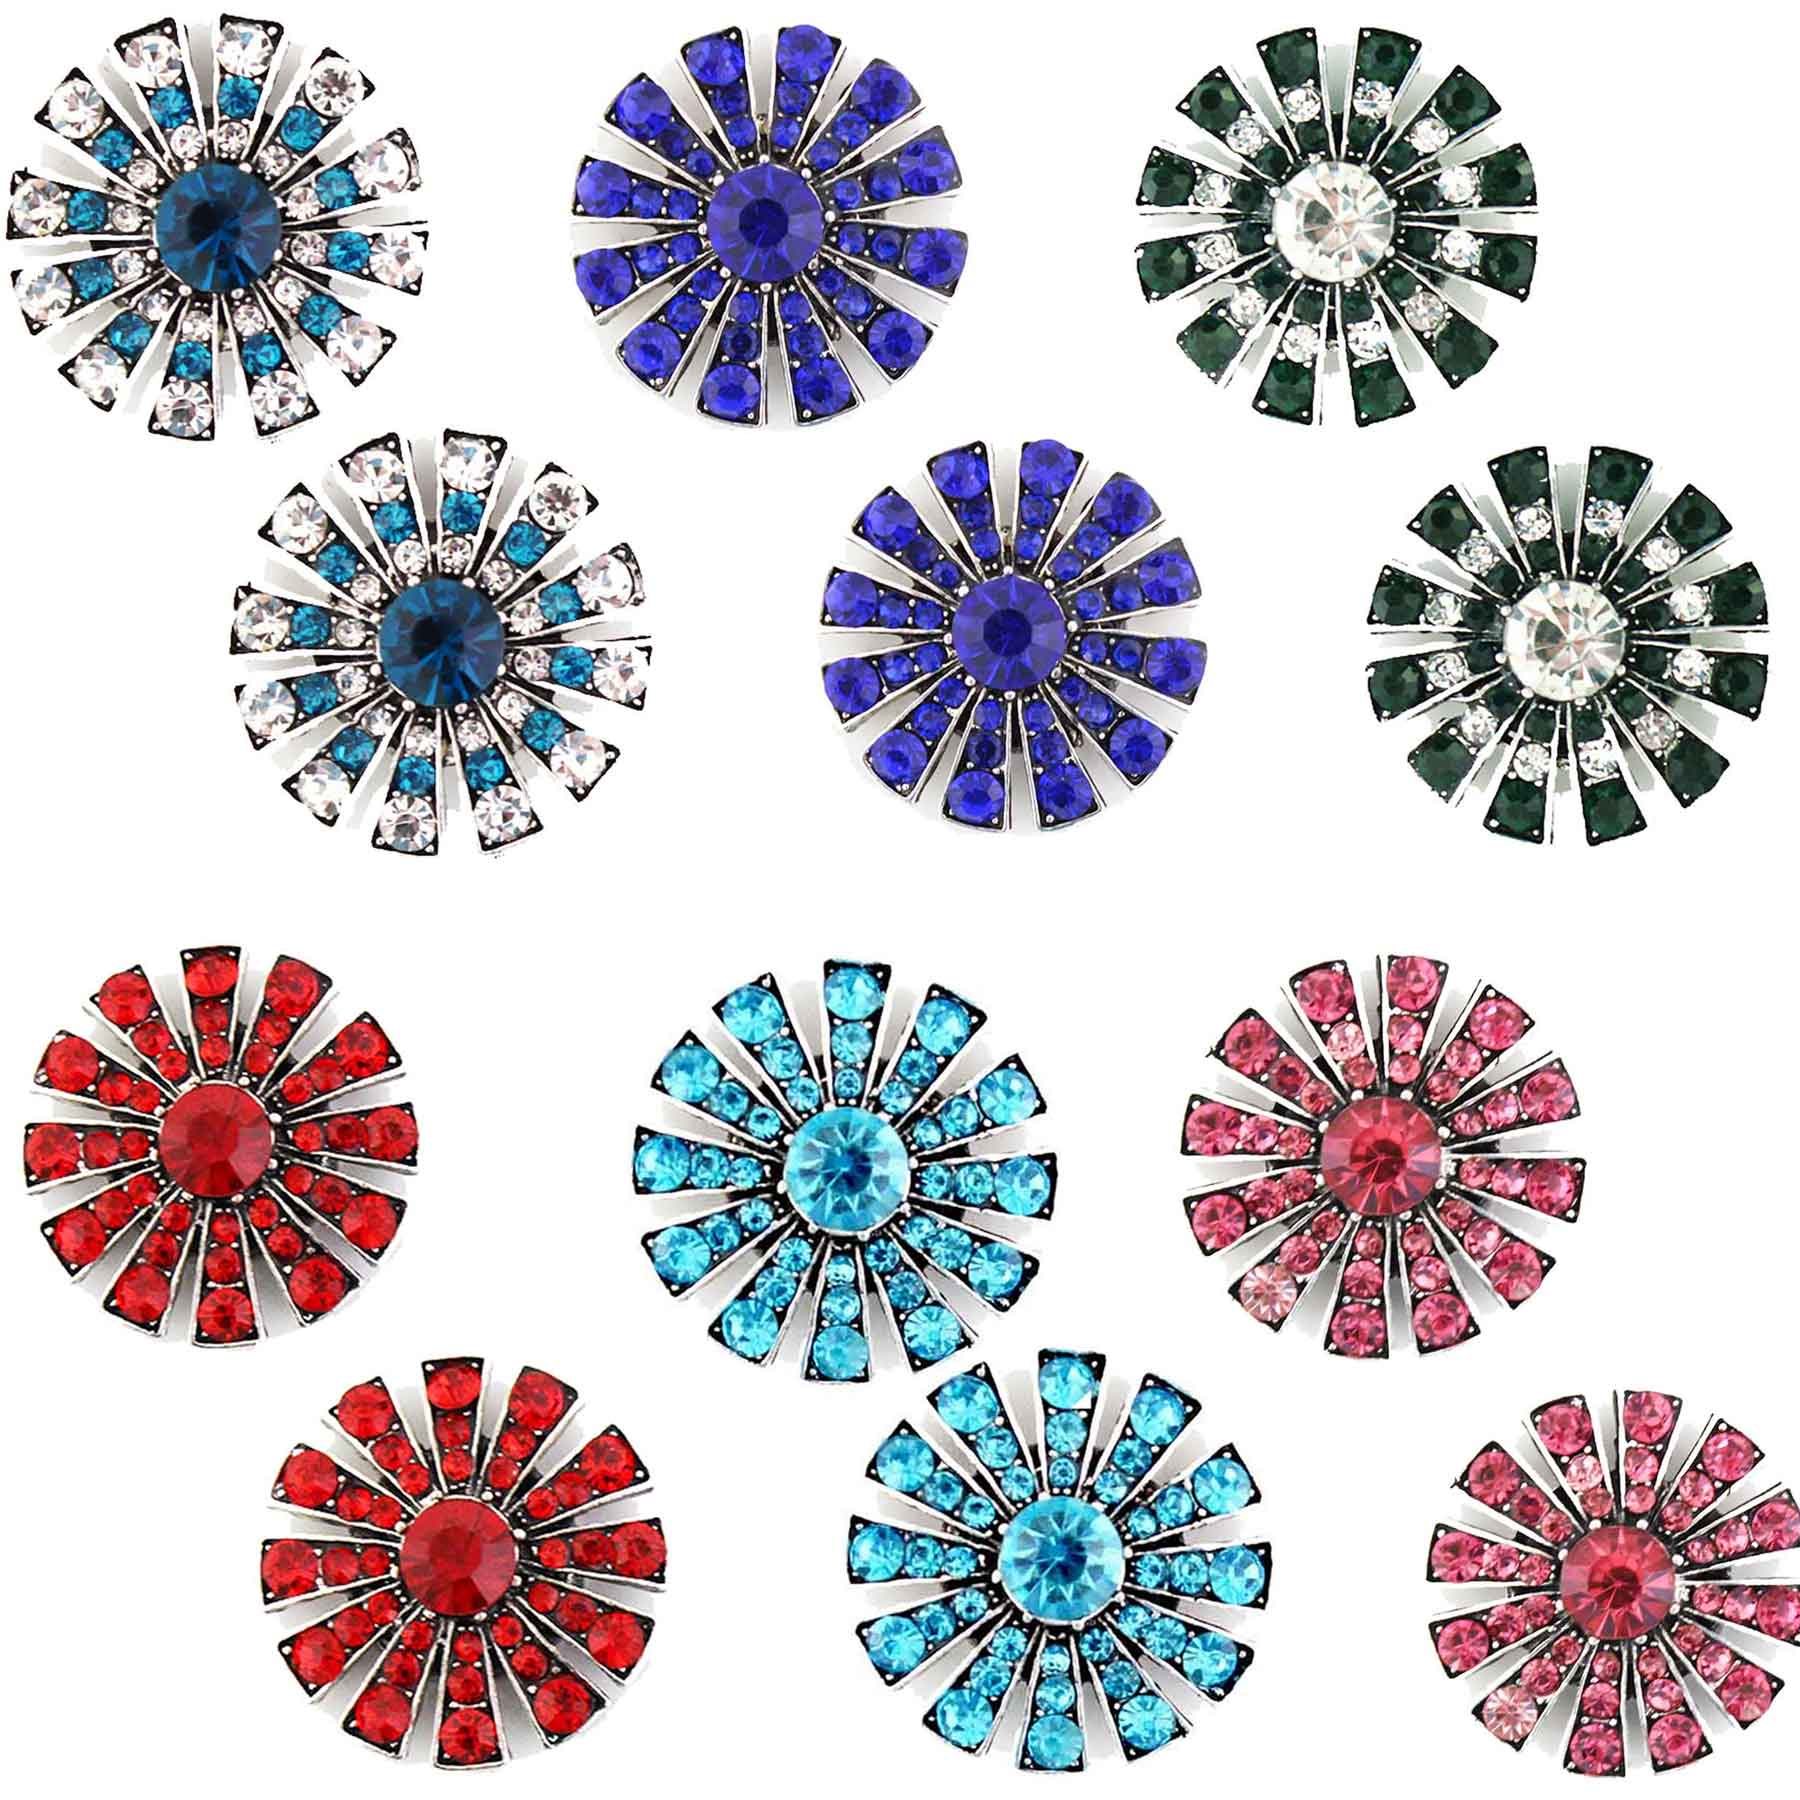 2907 Starburst Magnetic Brooches - Double Sided